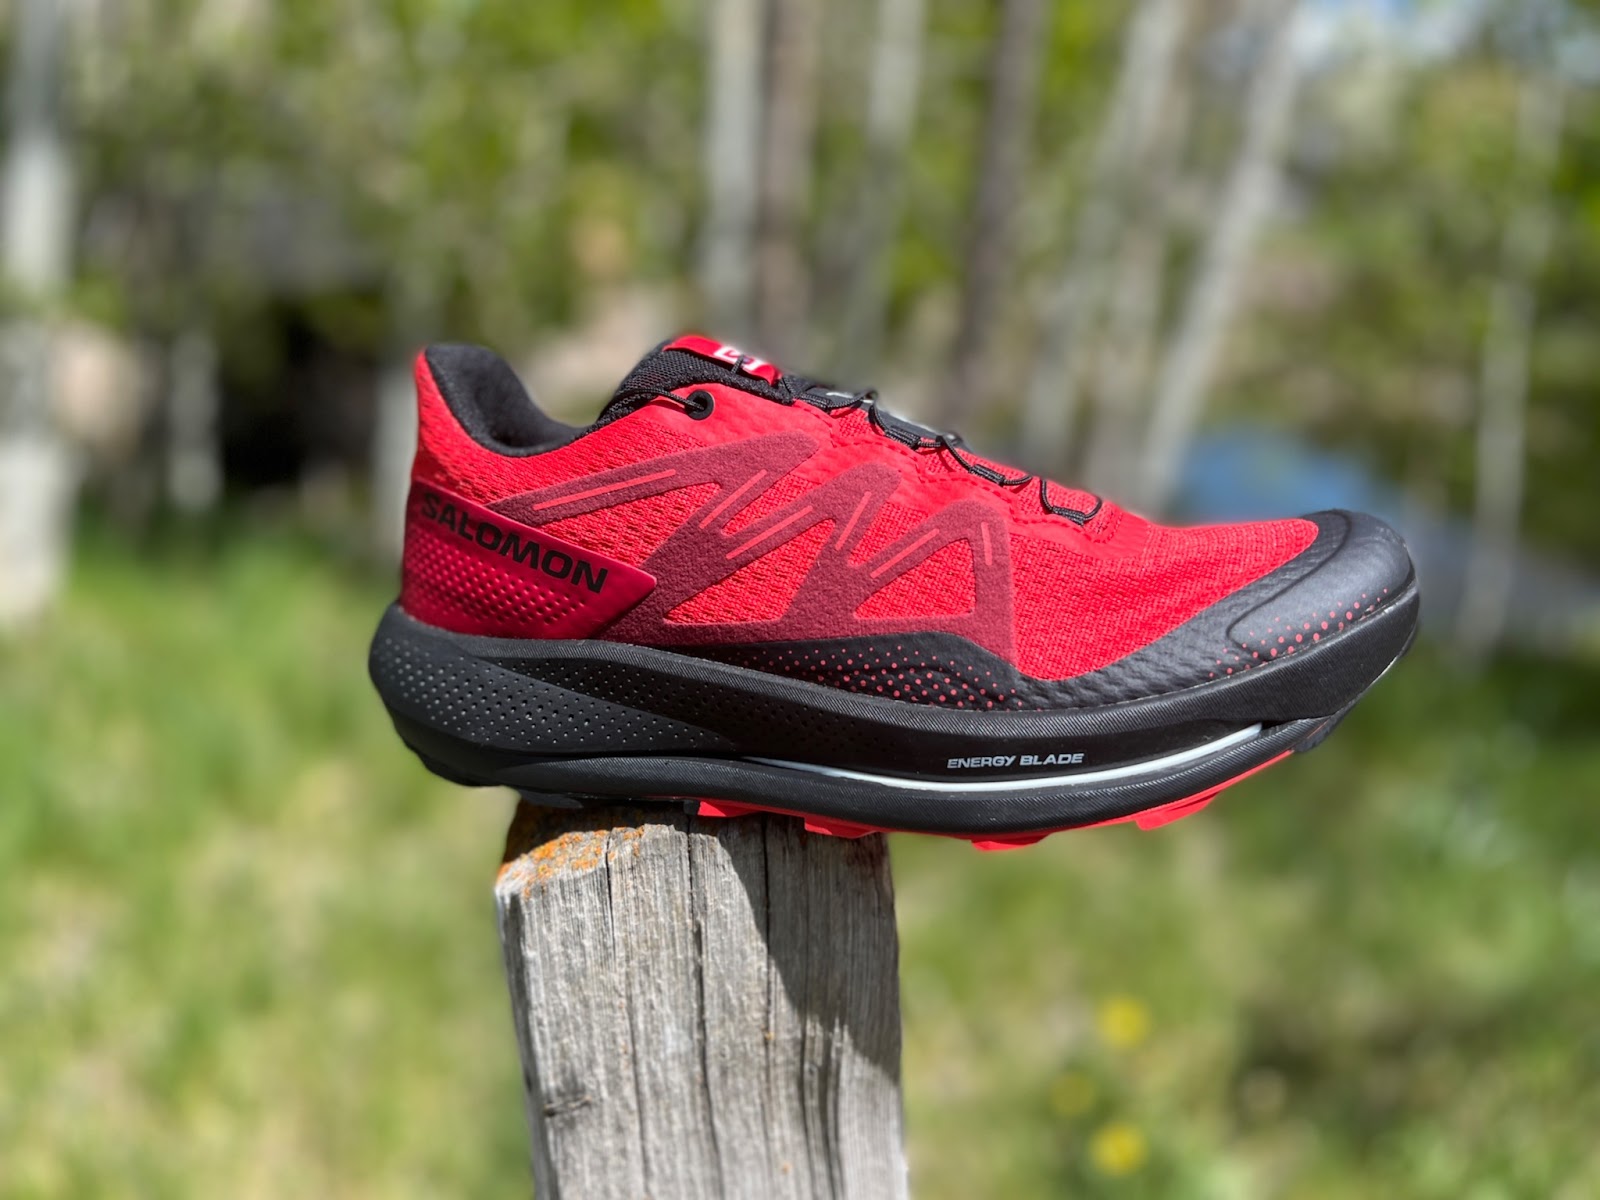 Road Trail Run: Salomon Pulsar Trail Review: The New Salomon! Plated, Protective, Deeply and Versatile.